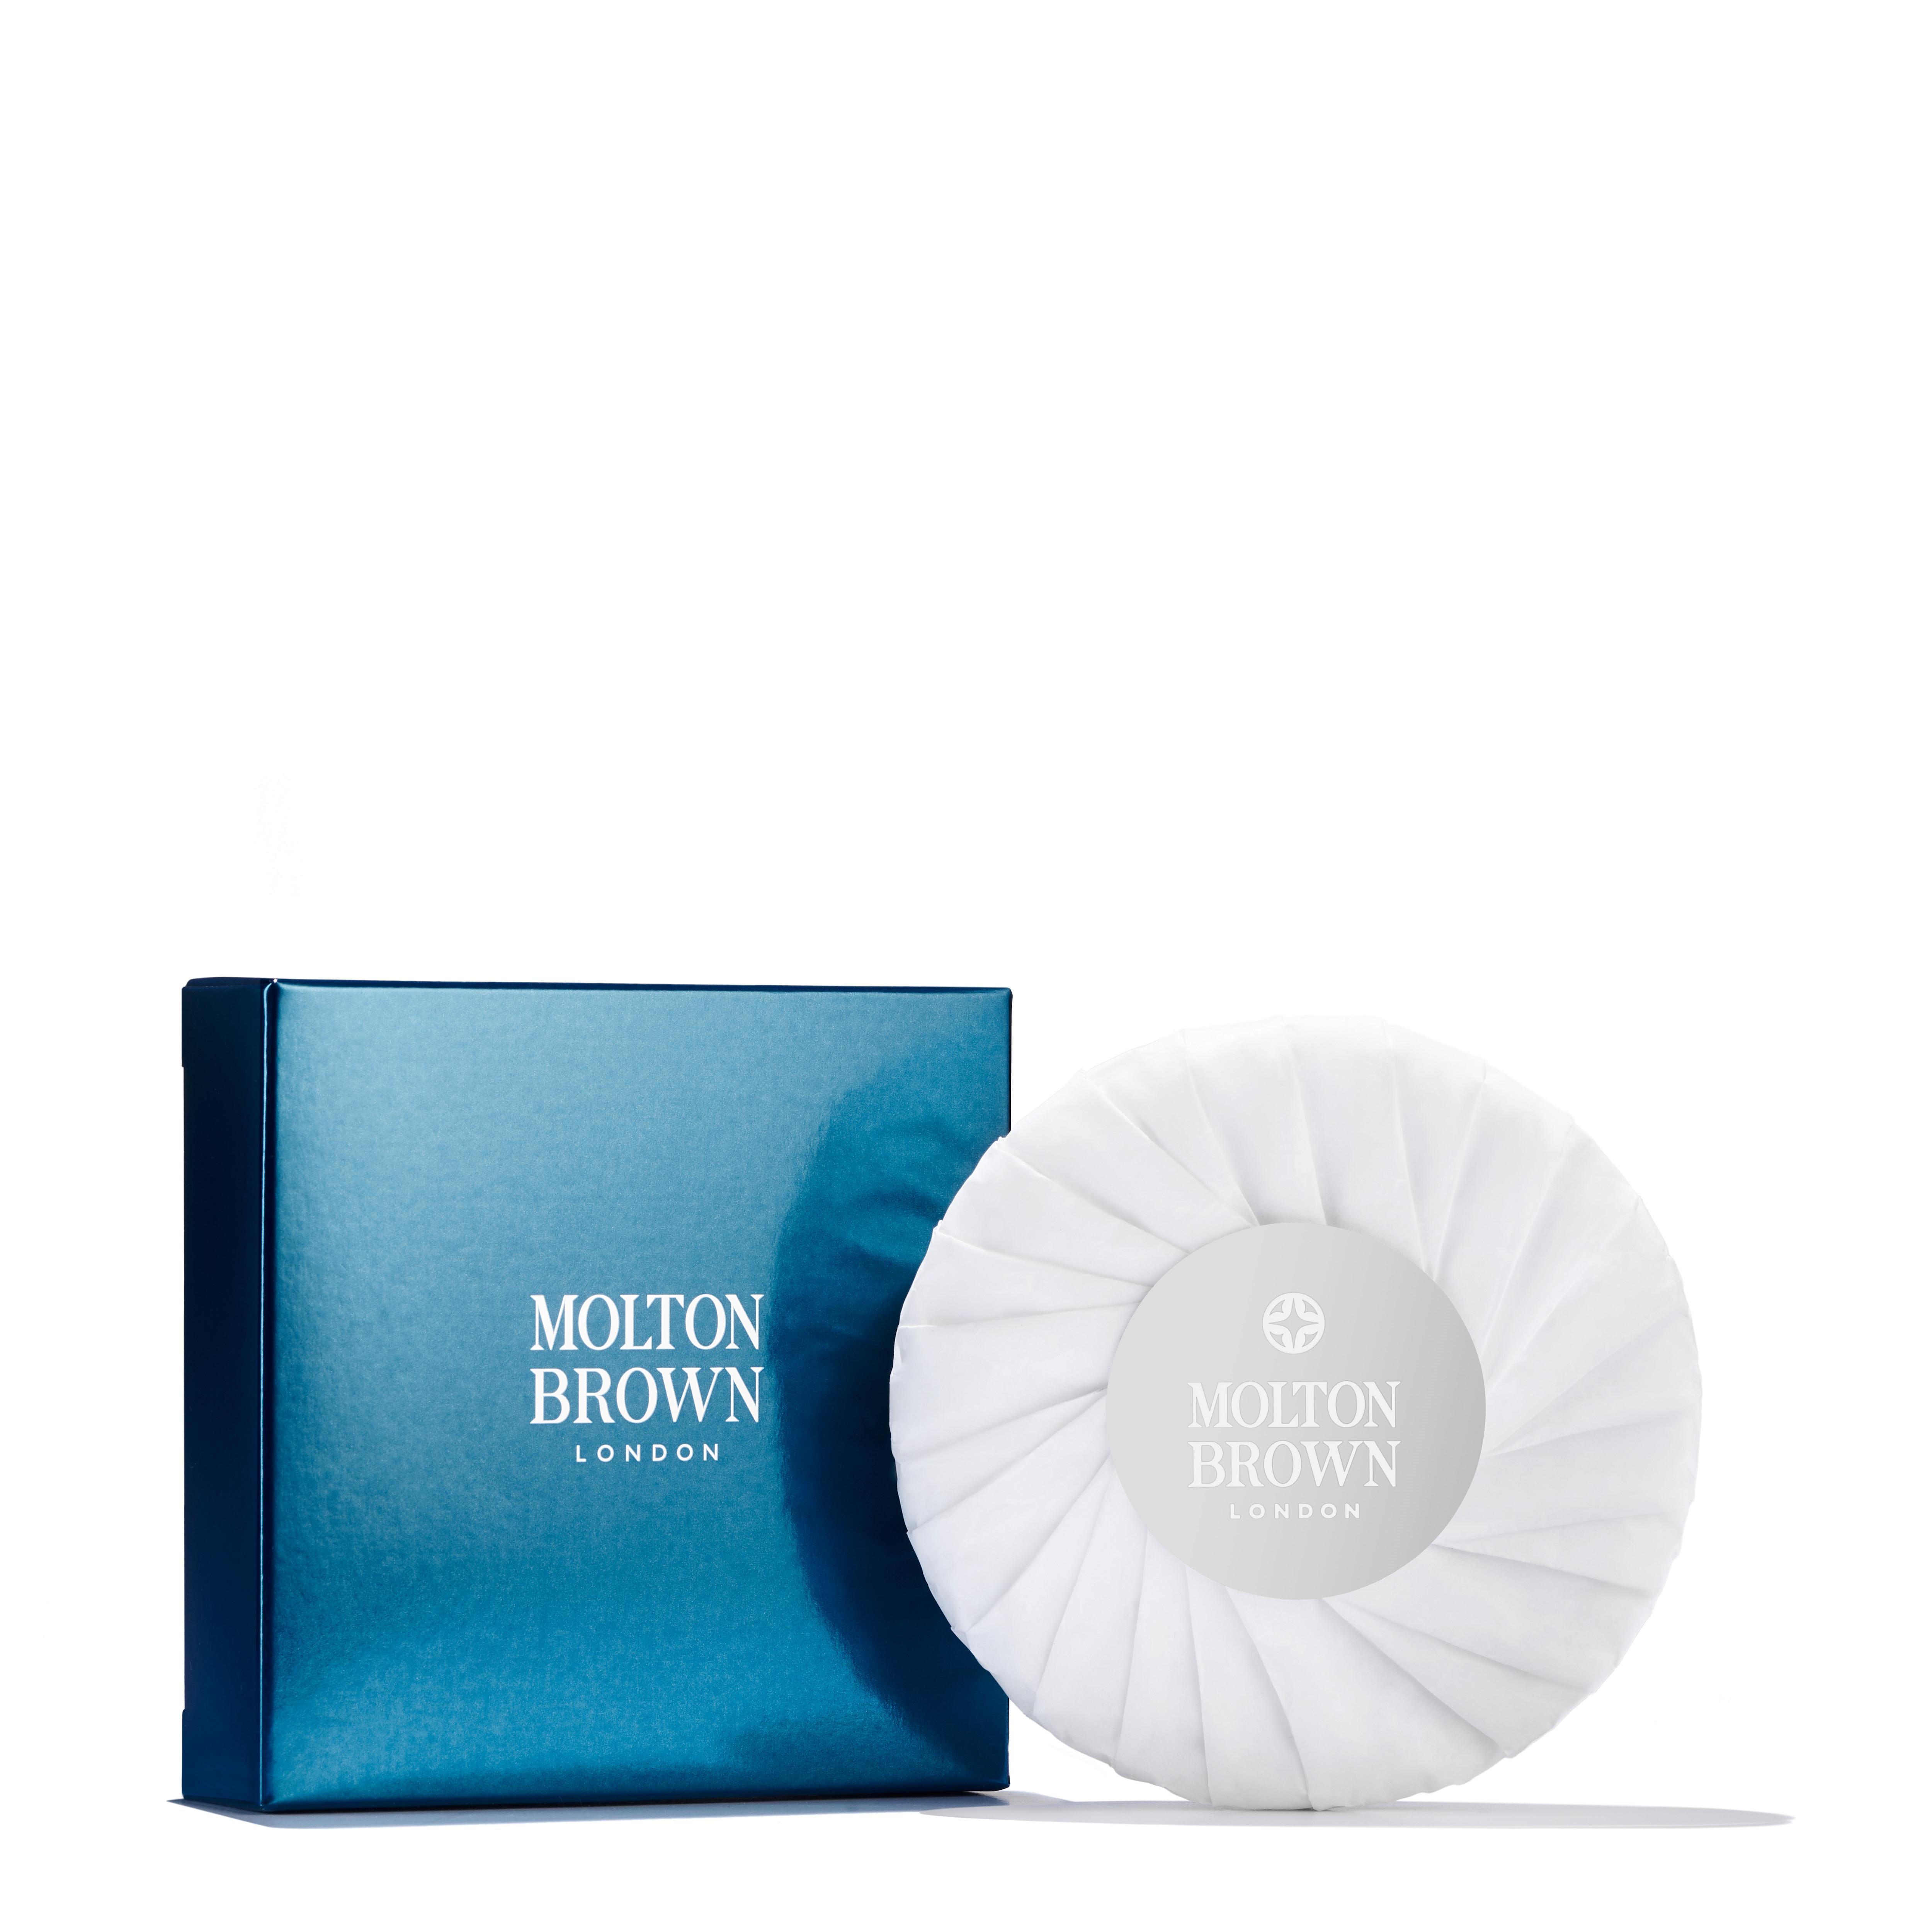 Shaving and Personal Care Products Logo - Molton Brown® Men's Shaving Soap